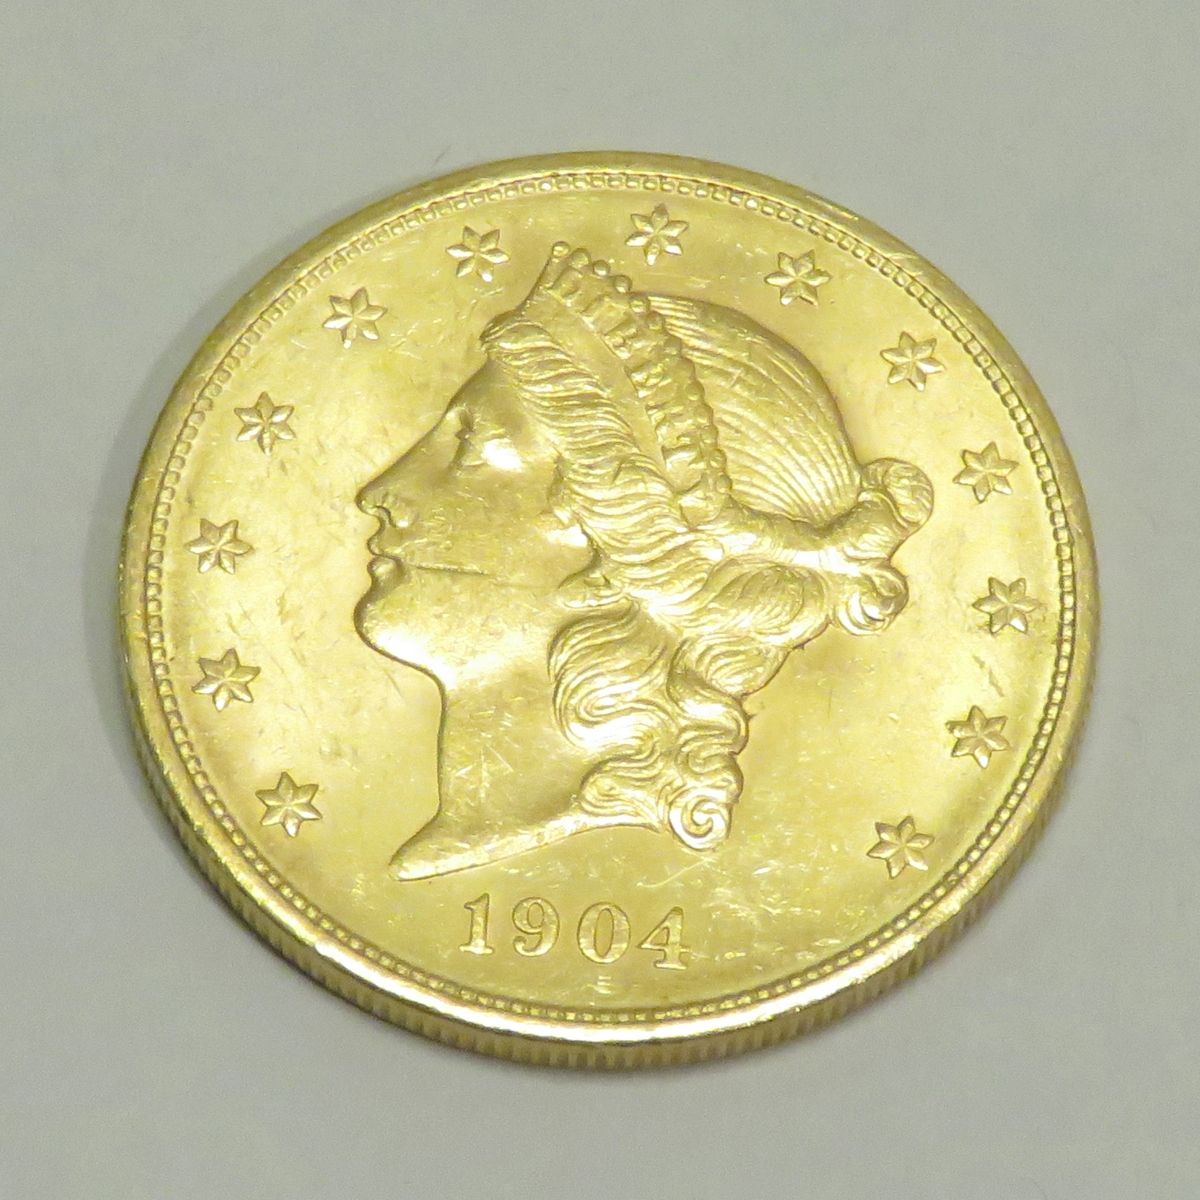 Null 20 Dollars gold coin "Liberty Head-Double Eagle" dated 1904, Engraver: Jame&hellip;